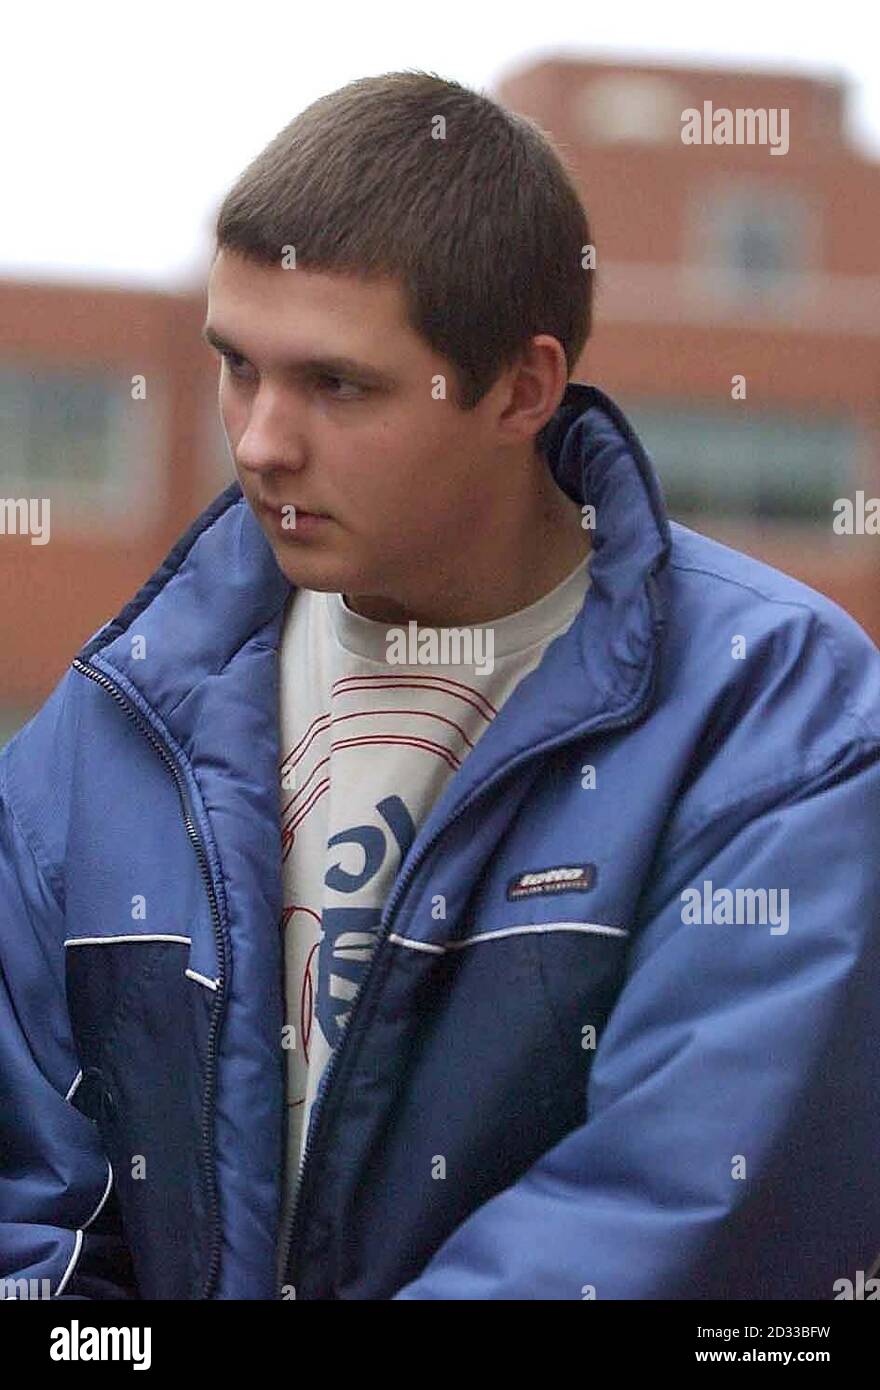 Paul James Smith, 17, leaving Loughborough Magistrates Court. Smith has been charged with the murder of ten-year-old Rosie May Storrie at a house party hosted by Smith's aunt and uncle in the Leicestershire village of Normanton. The girl was found unconscious, lying face down on a bed and was taken to hospital where she later died. A post mortem examination found the cause of death was oxygen starvation of the brain due to strangulation.  28/10/04: Paul Smith 18, was found guilty at Nottingham Crown Court of the murder of 10-year-old stage star Rosie May Storrie as her parents chatted with gue Stock Photo